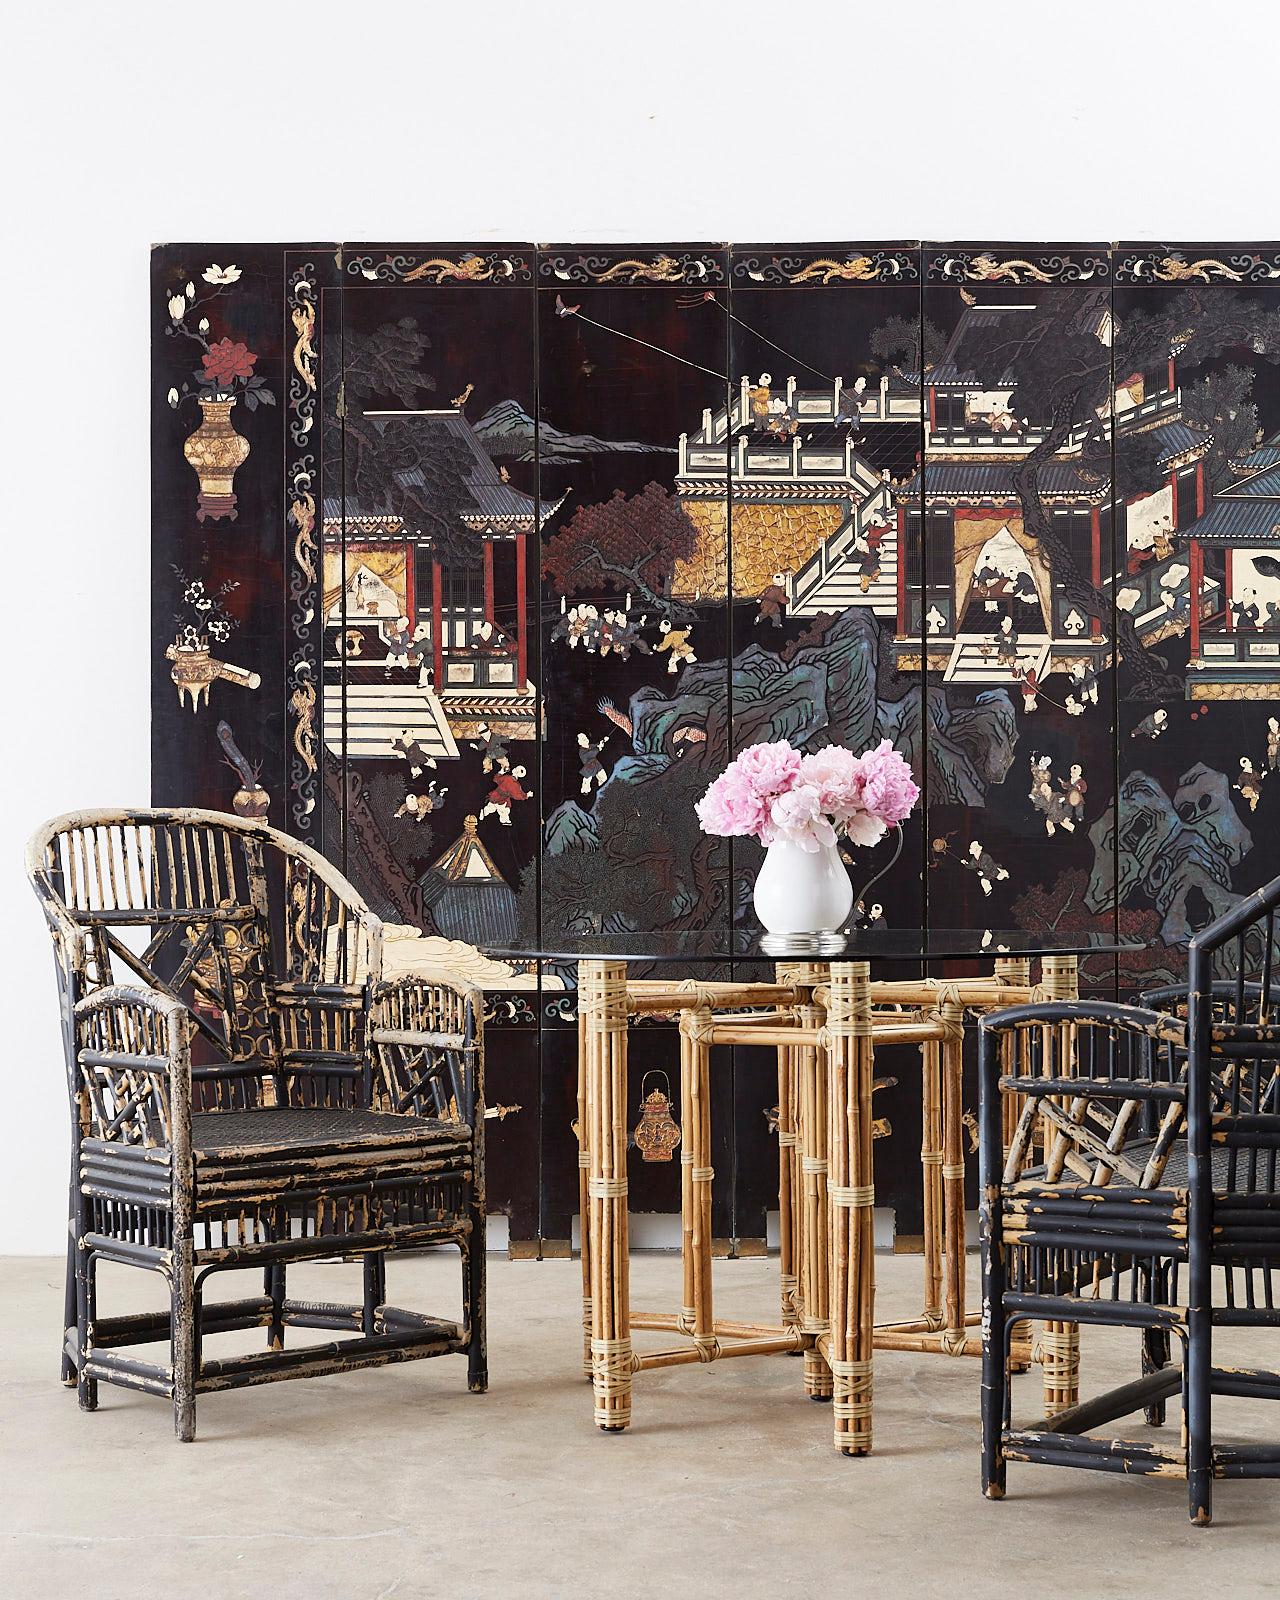 Large Chinese export eight-panel folding coromandel screen depicting young boys playing in a courtyard scene amid pagodas. The reverse side consists of a treed landscape featuring white cranes among flowers and vines. The front is bordered by